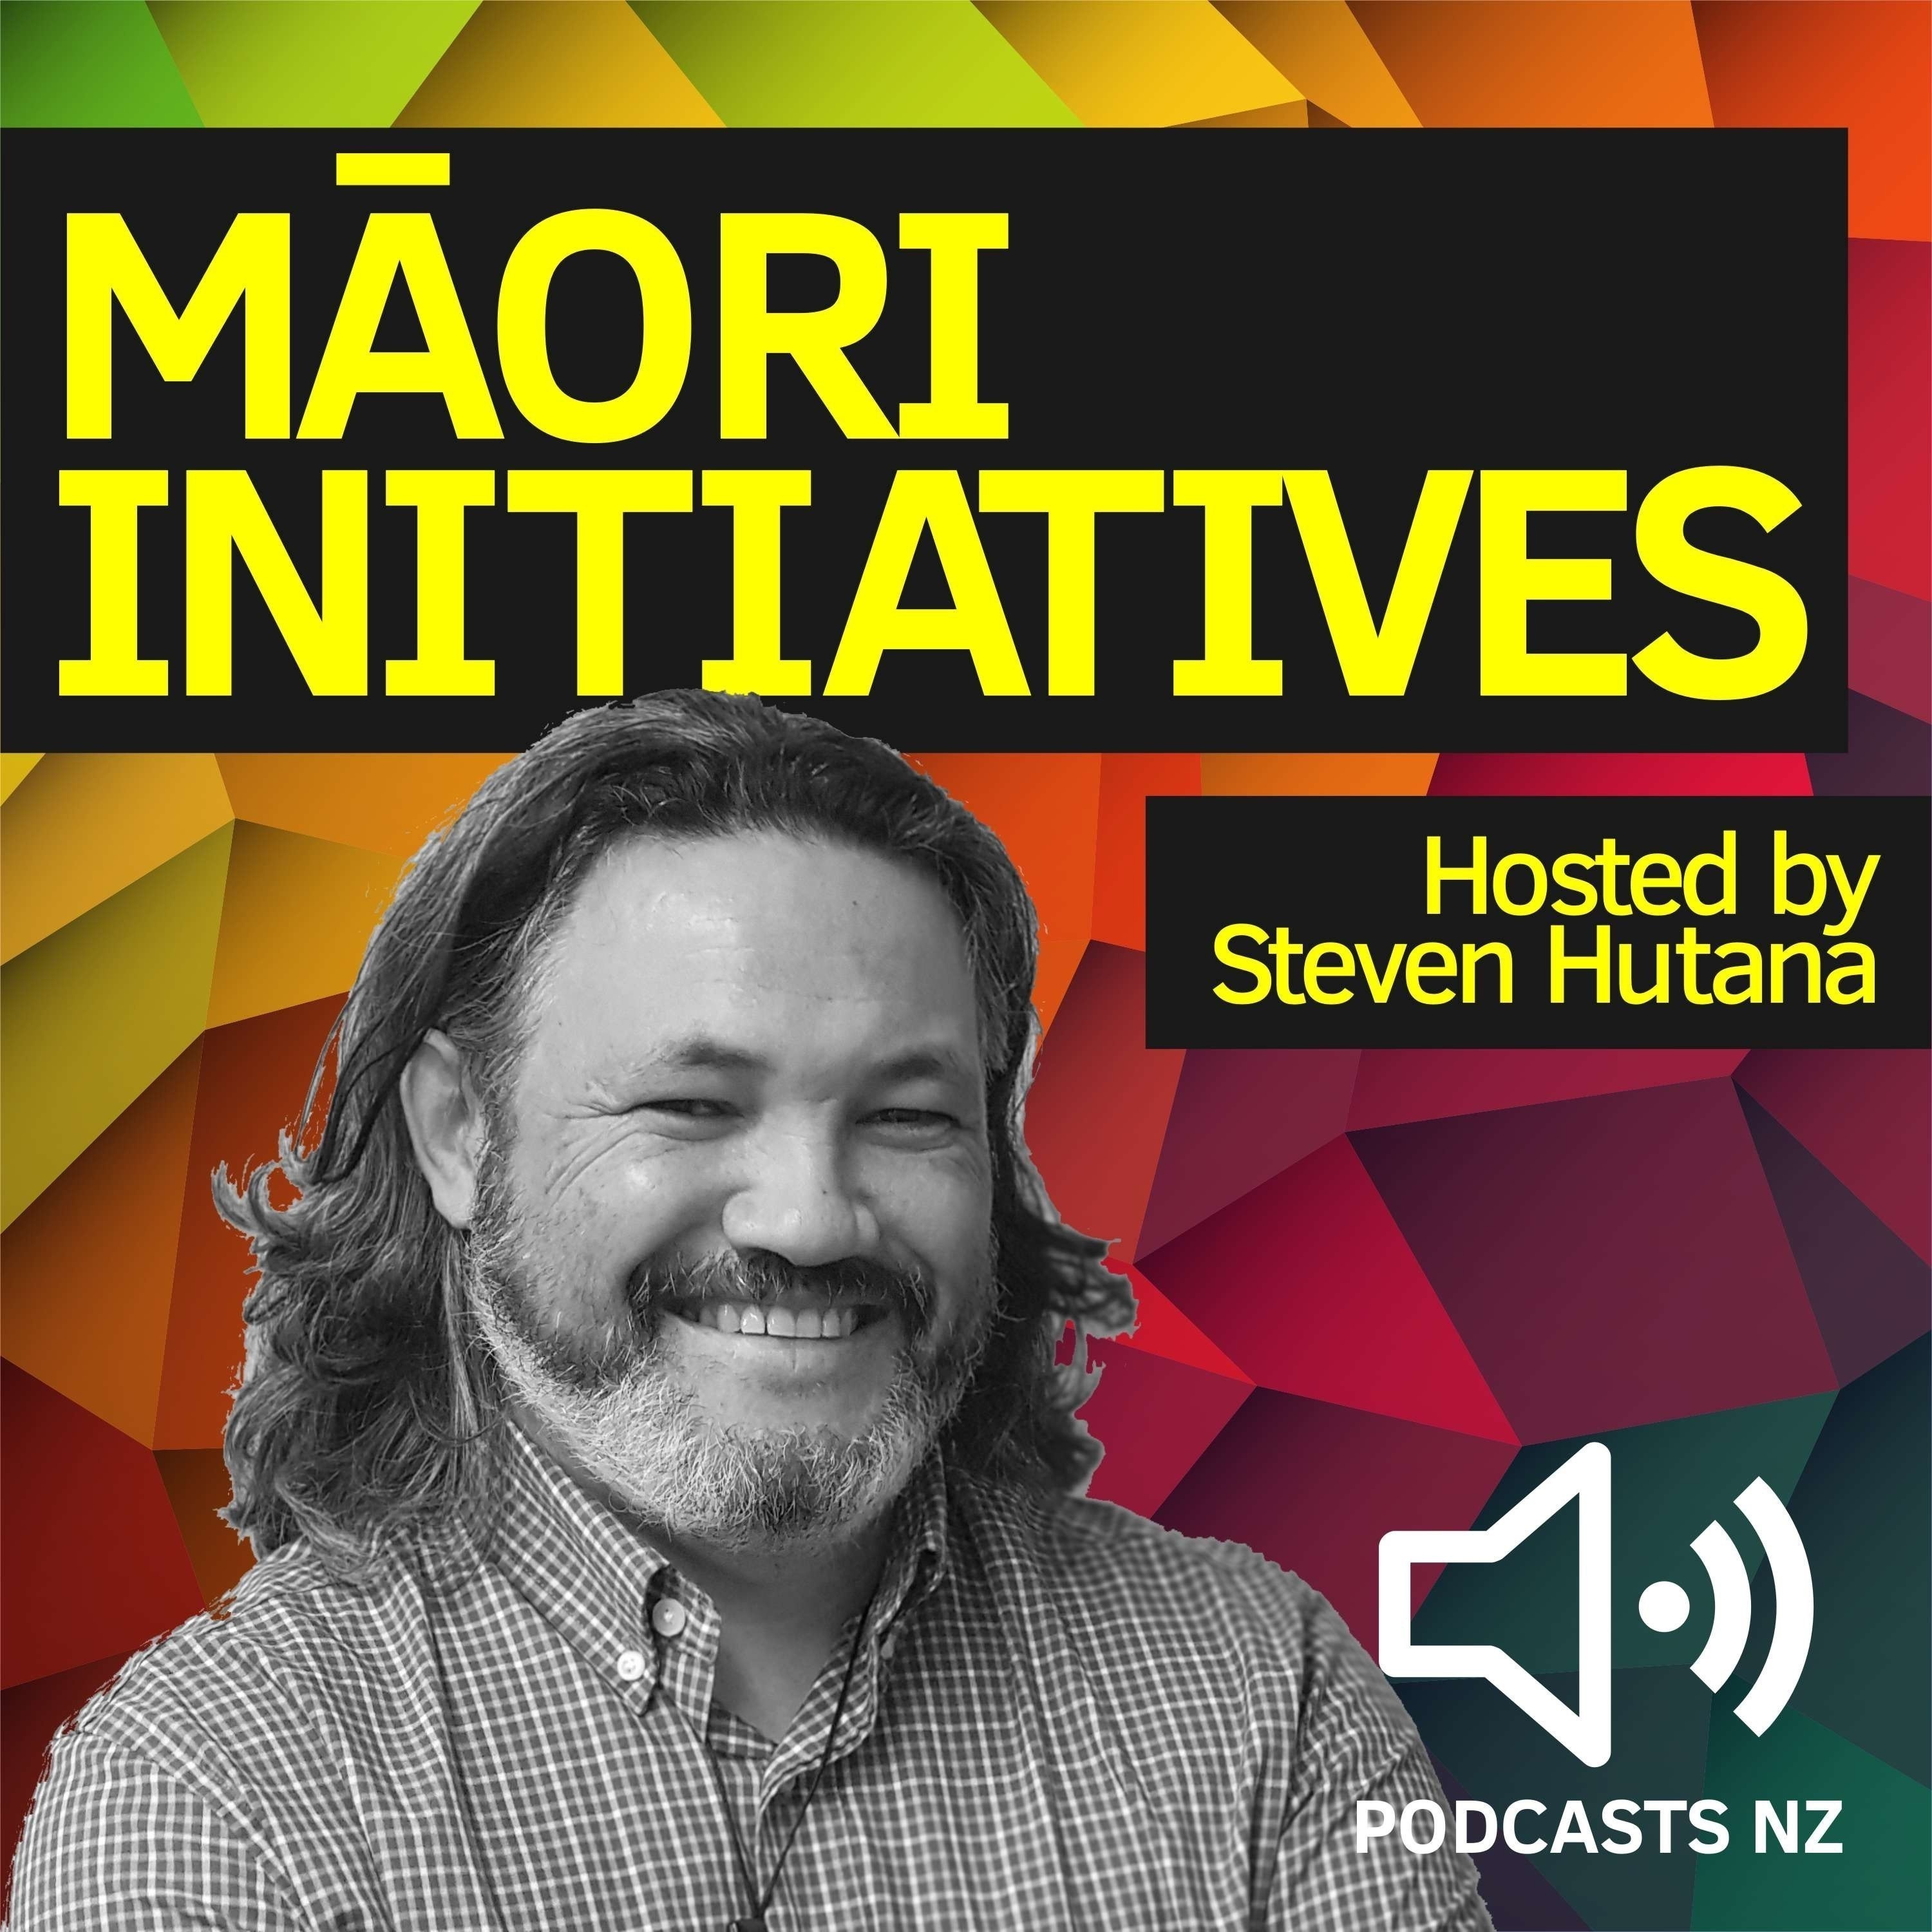 Maori Initiatives:Te Mangai-The Mouthpiece Podcast 10: Justin Newcombe and Anna Subritzky discuss the Waterview Tunnel effects